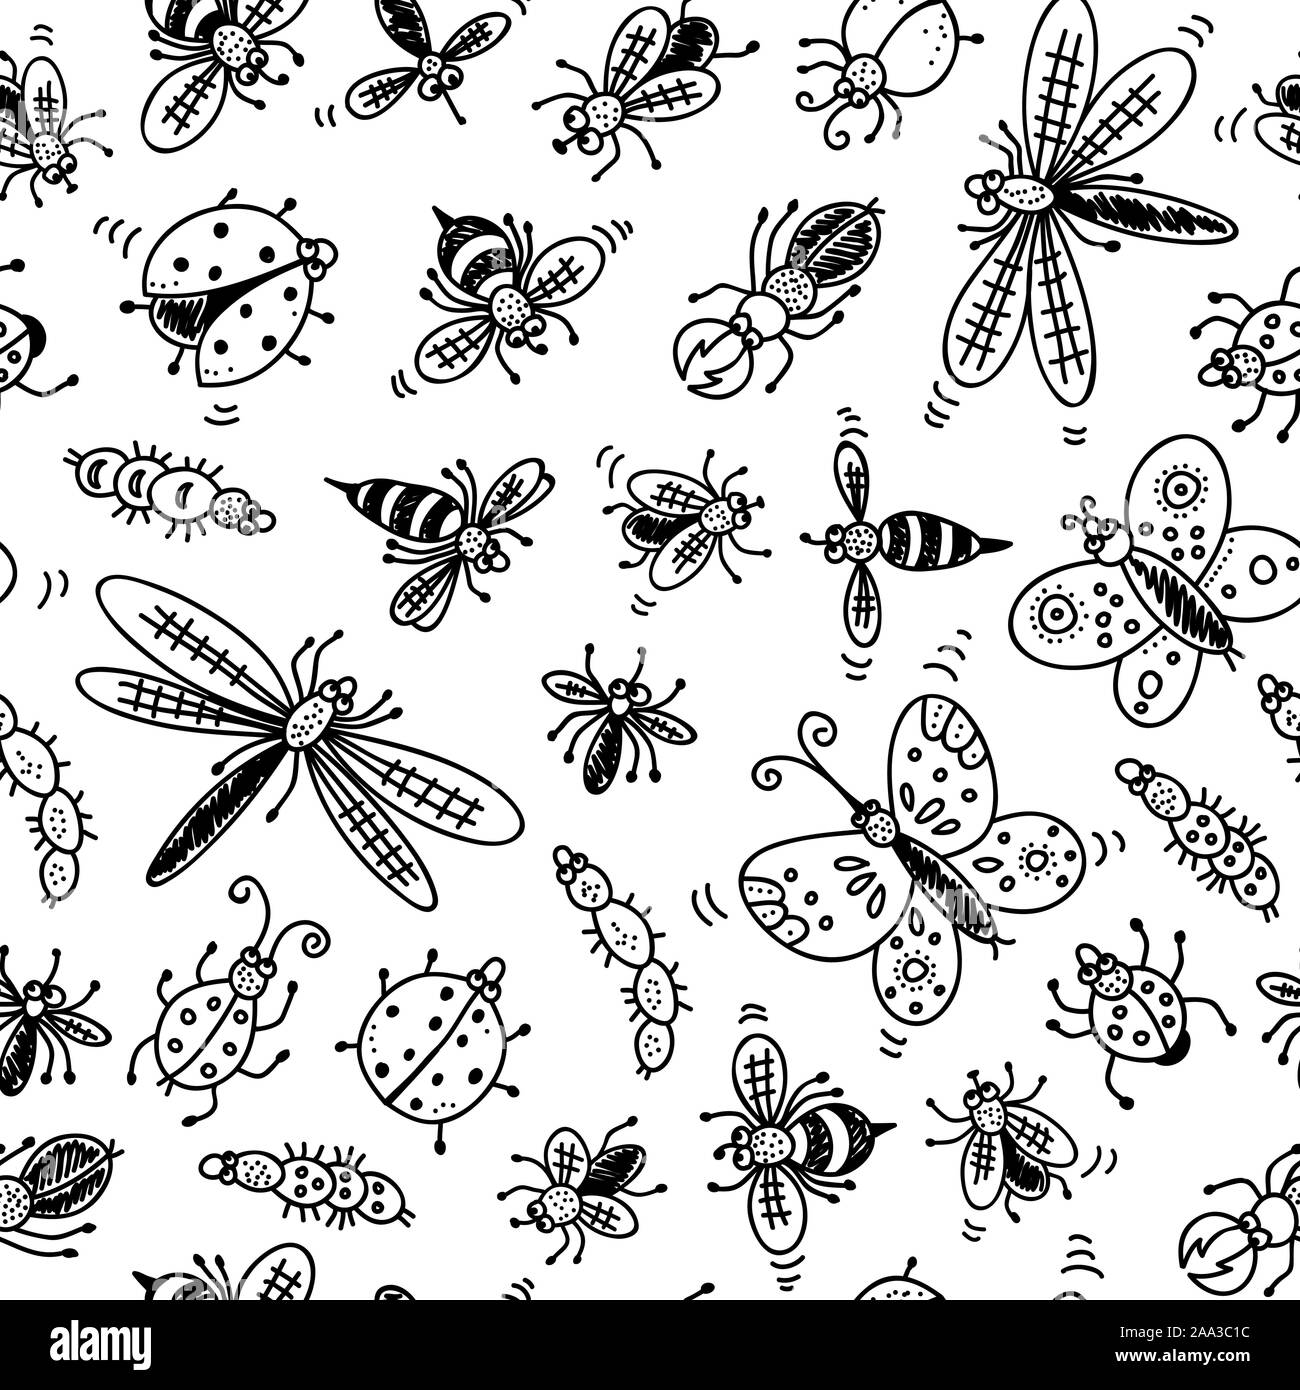 Insects doodle seamless pattern, vector background with bug, fly, butterfly, ladybug, dragonfly, wasp, centipede Stock Vector